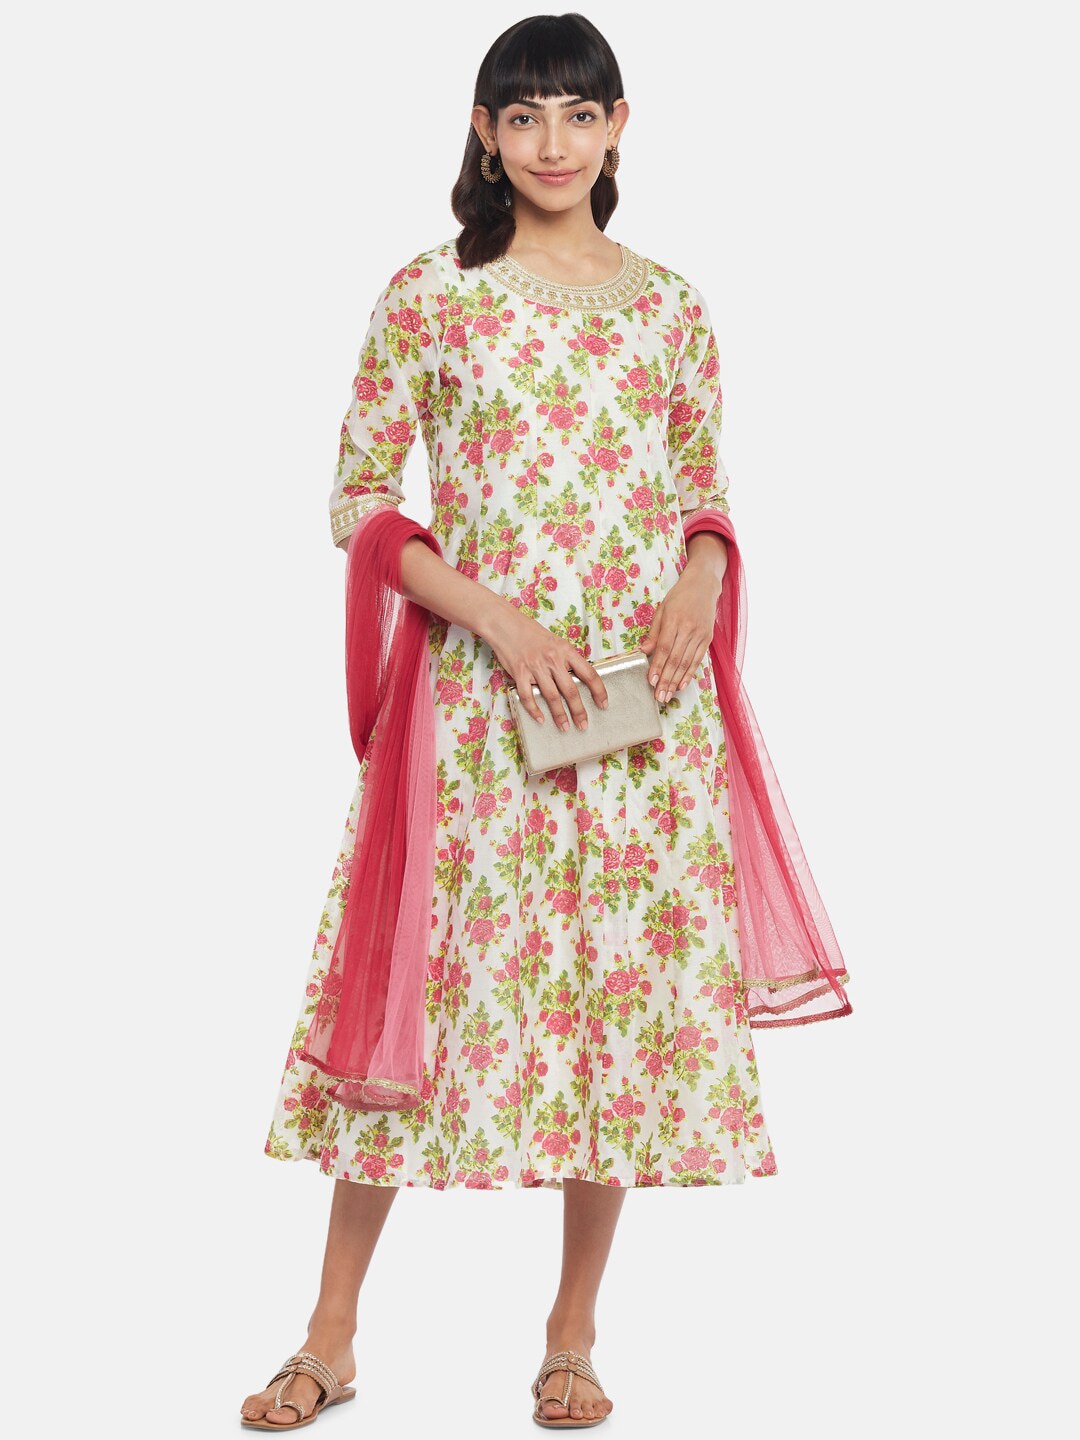 RANGMANCH BY PANTALOONS Pink & light gray Floral Ethnic Midi Dress Price in India